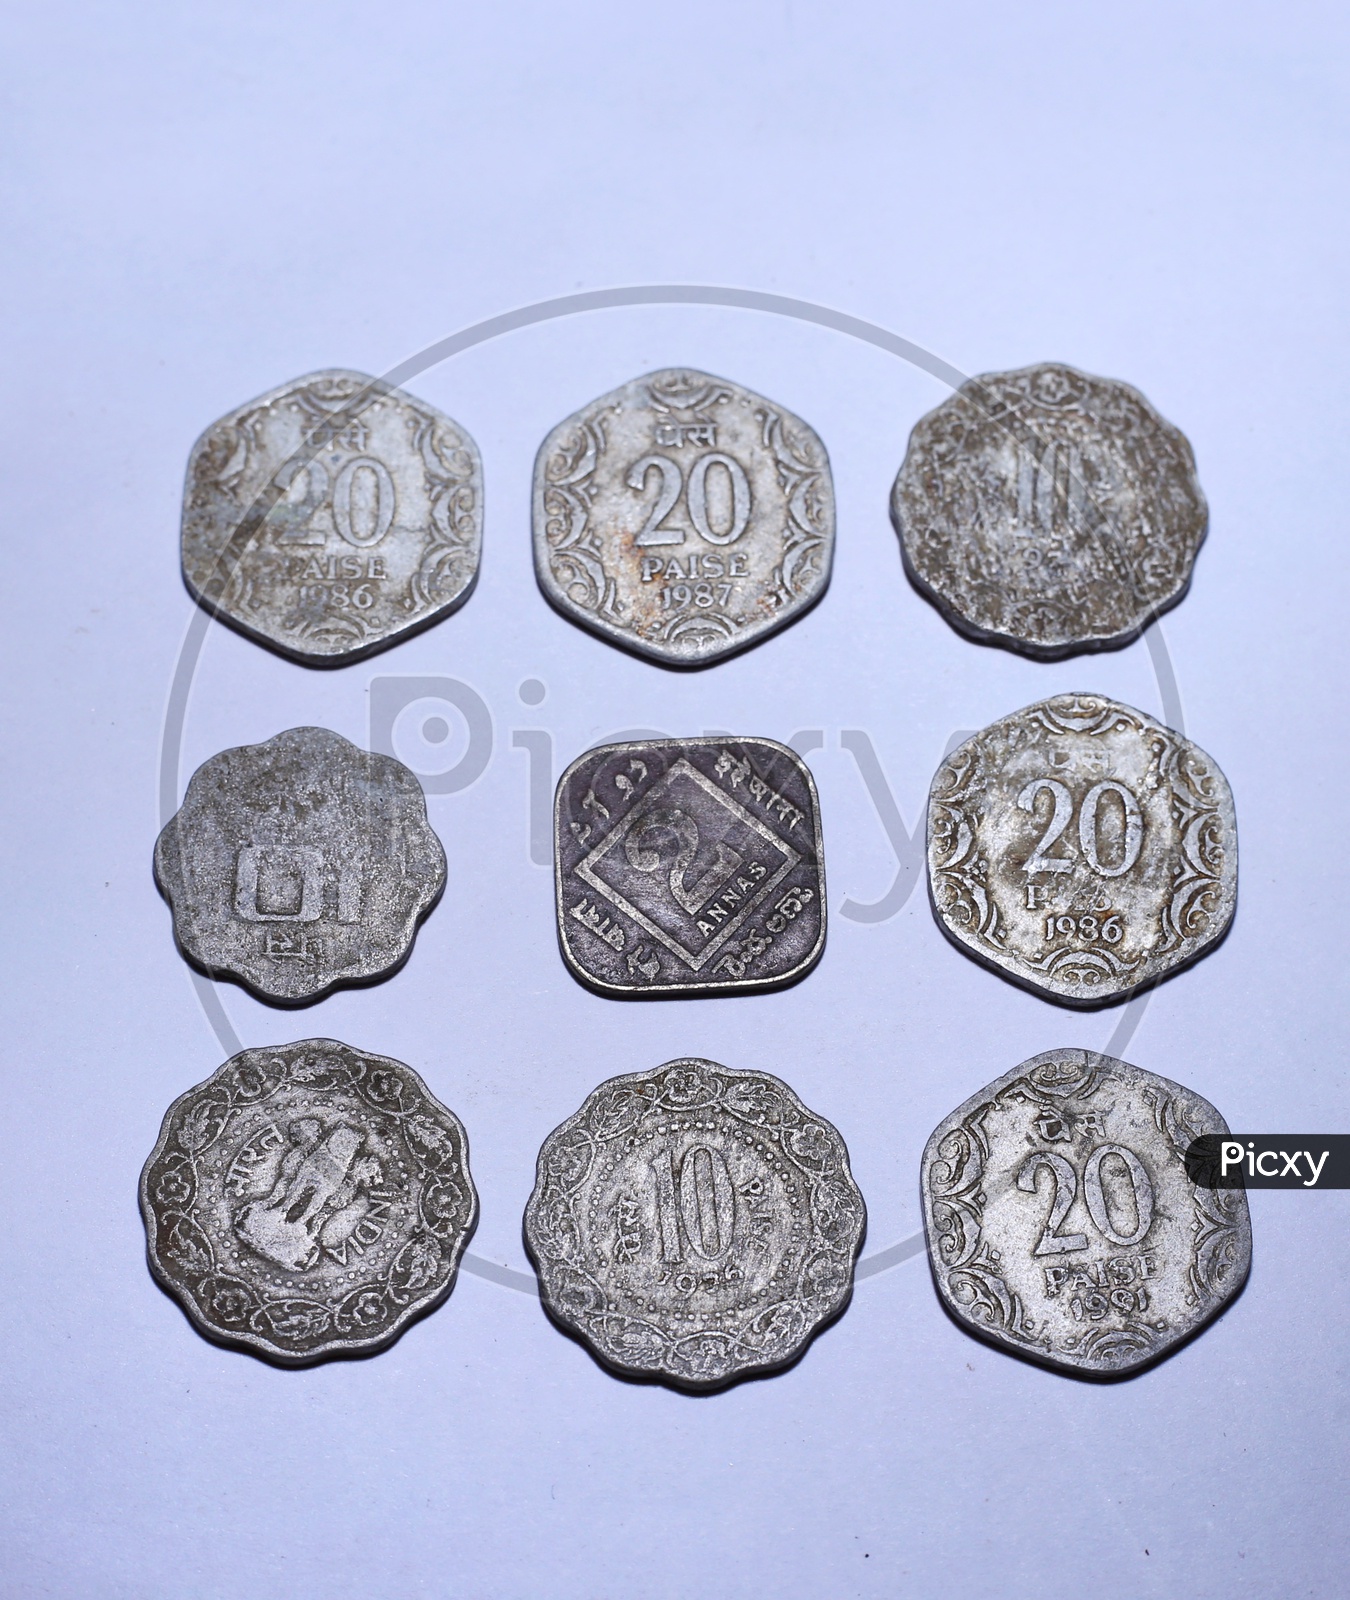 Indian old currency coins